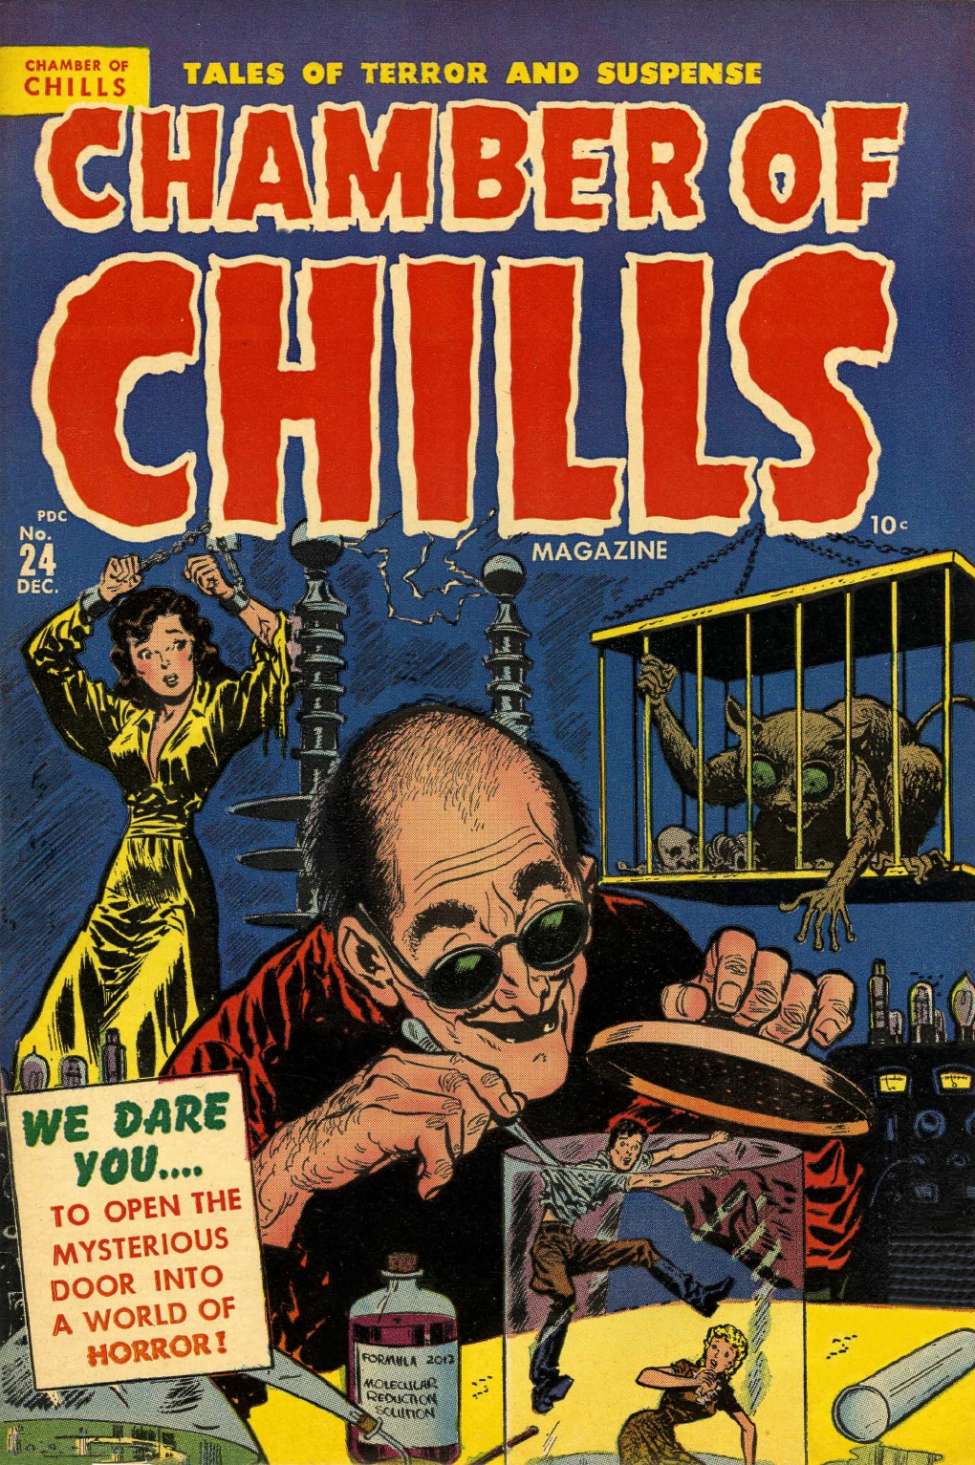 Book Cover For Chamber of Chills 4 (24)